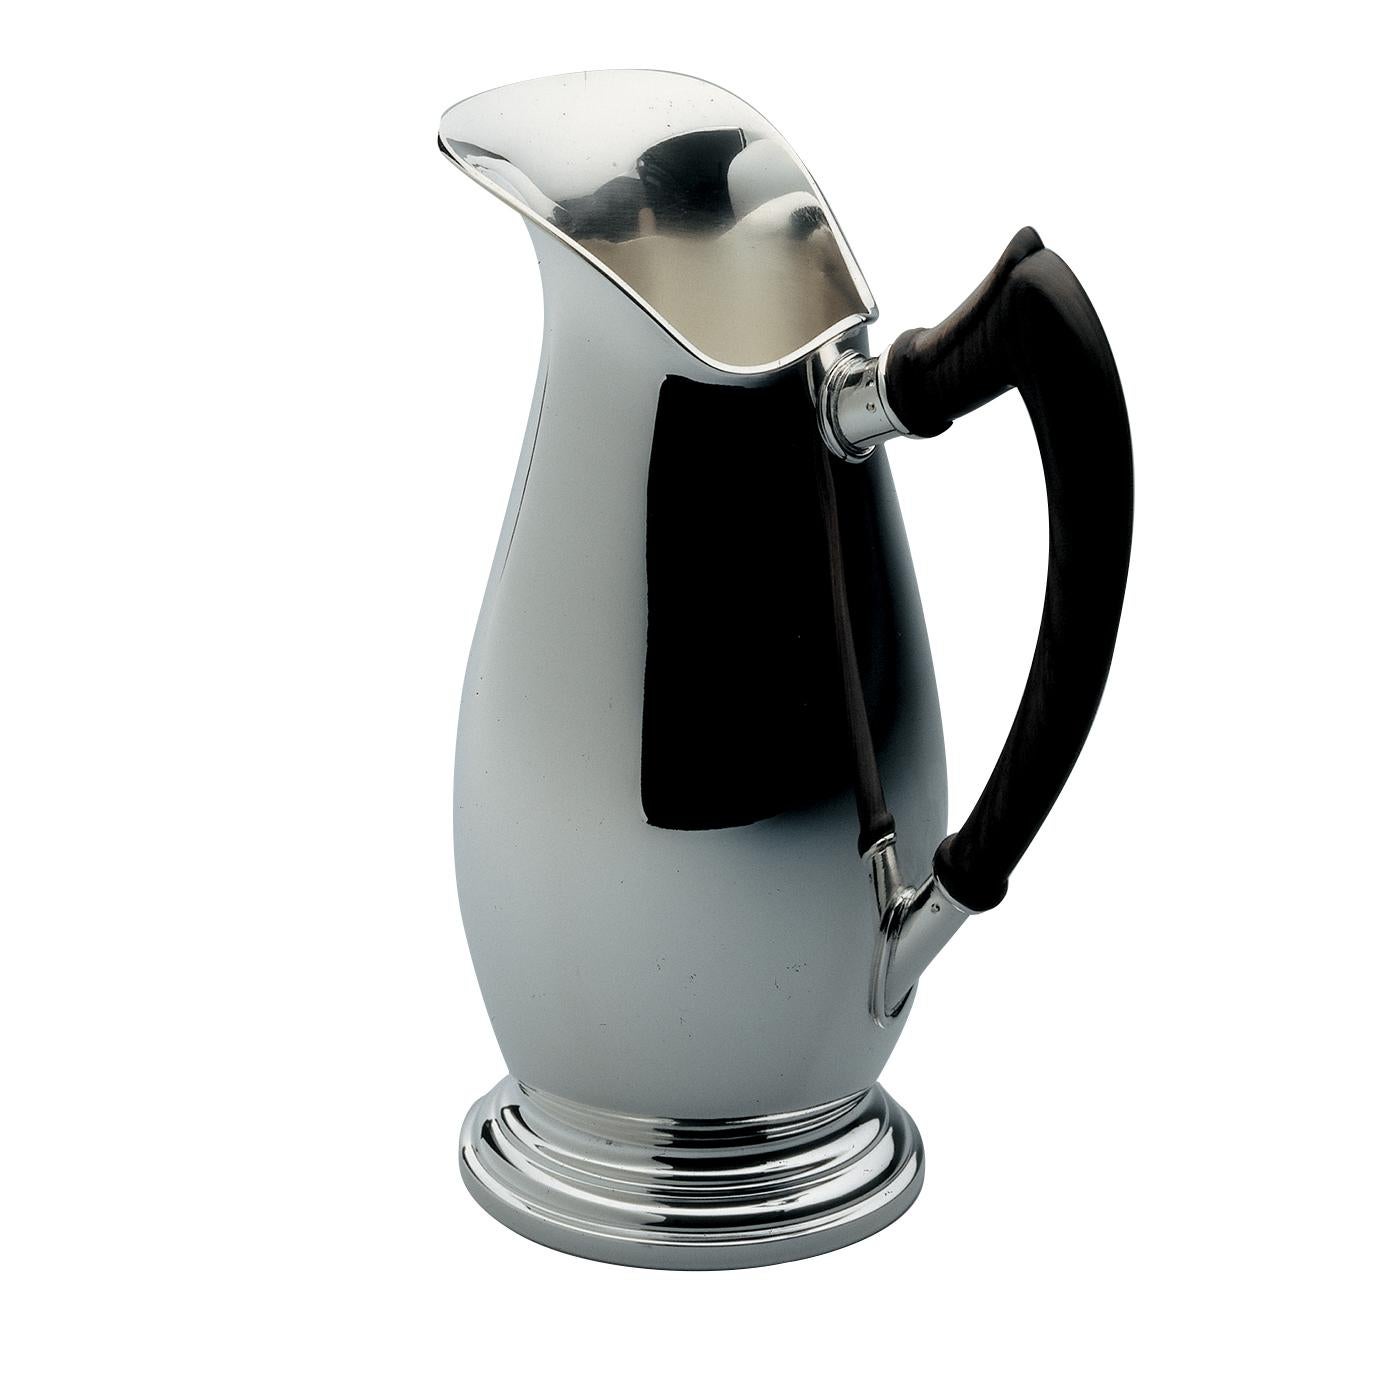 Italian Ascot Pitcher with Wooden Handle